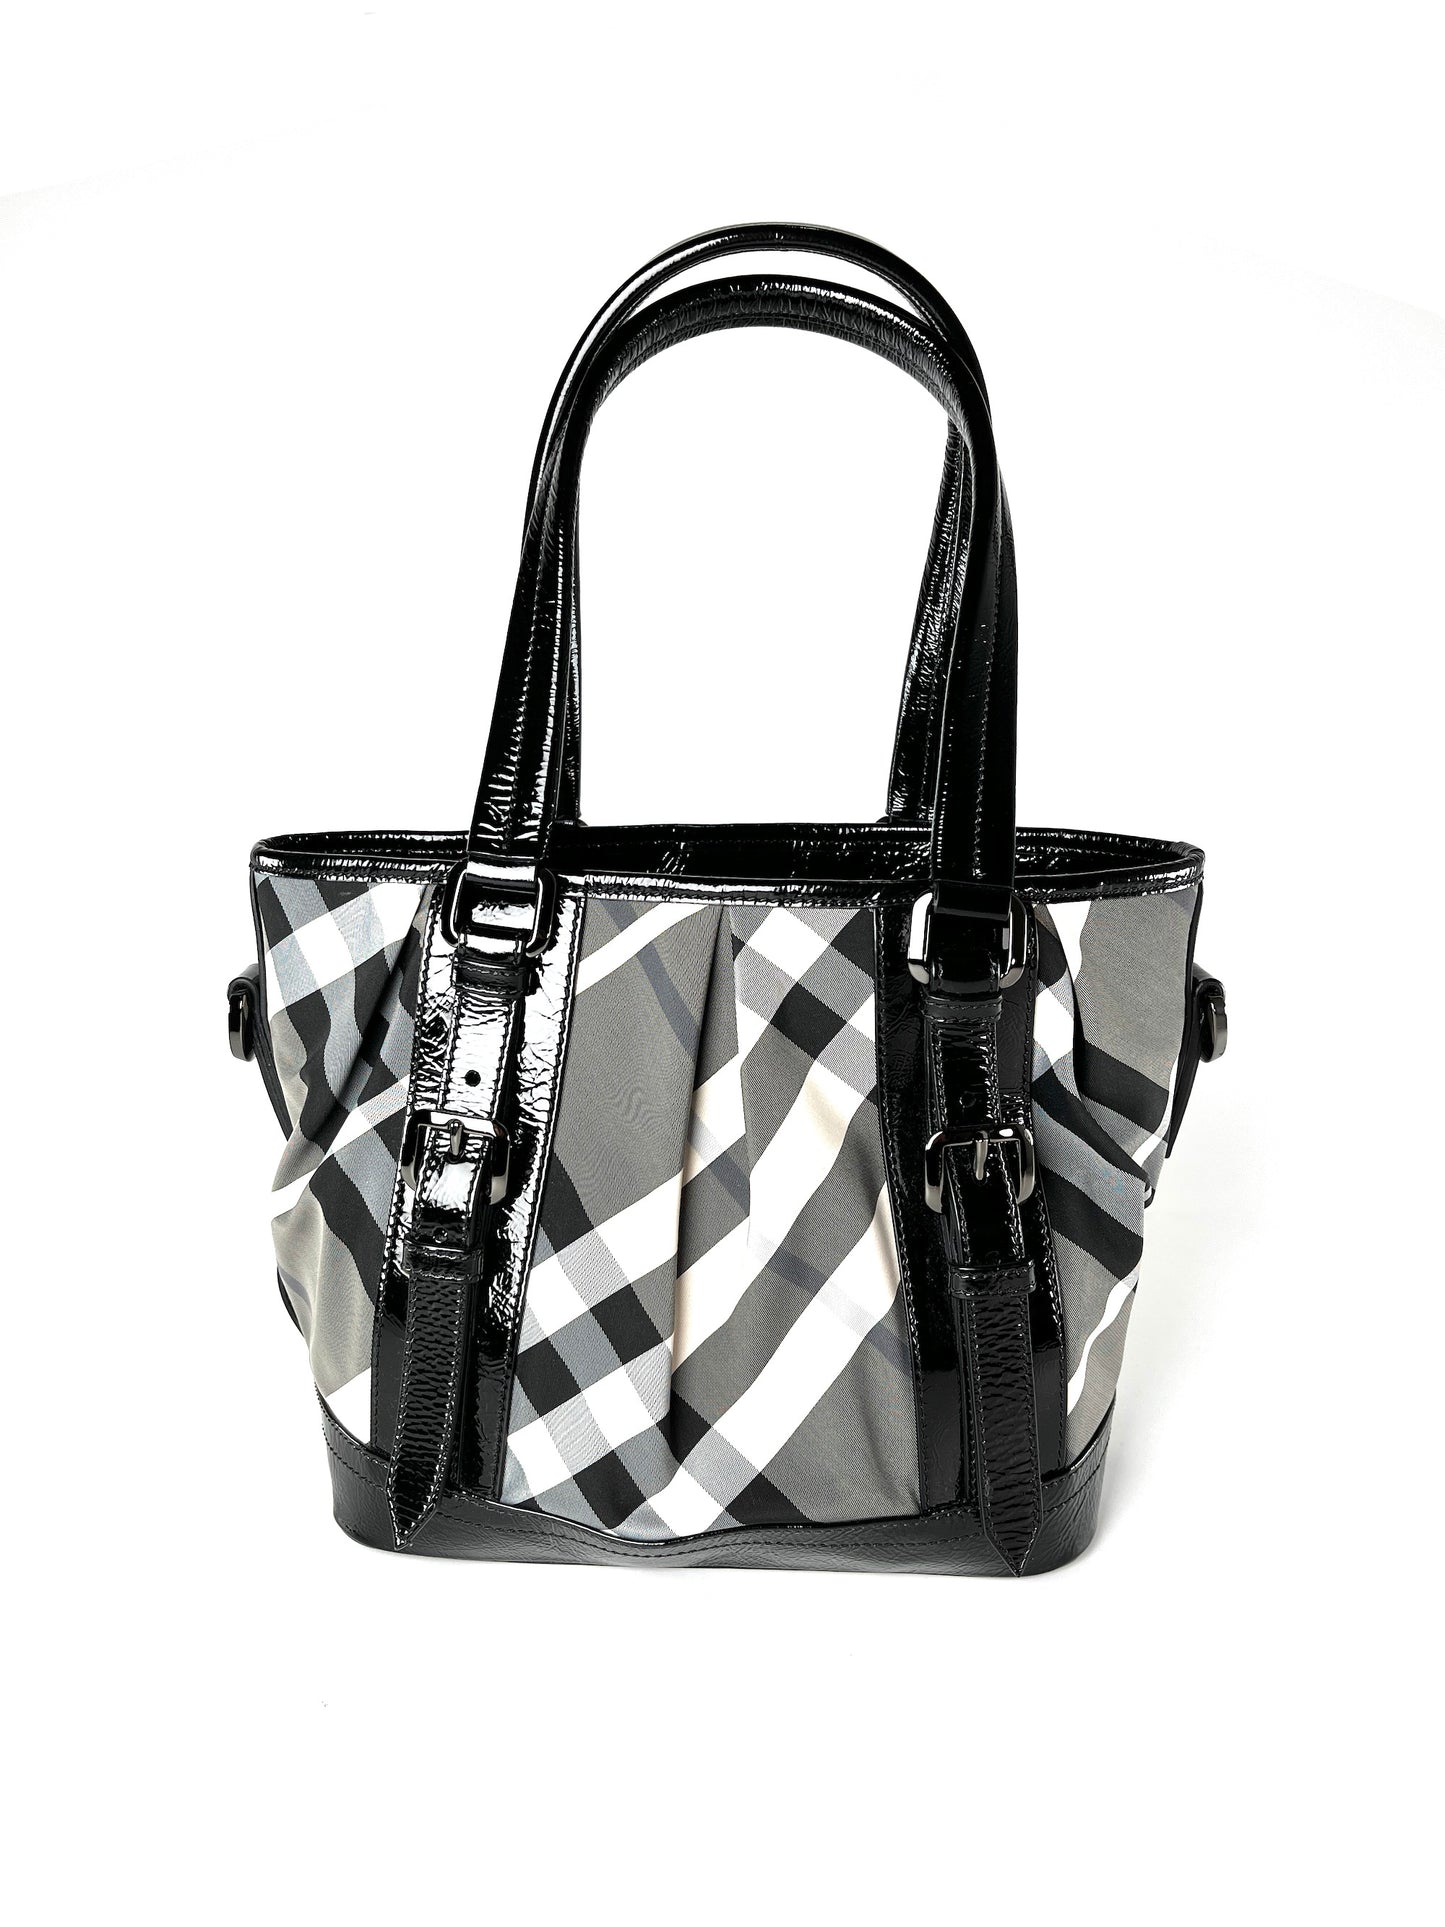 Burberry Nylon Leather Black Beat Check Lowry Tote Bag